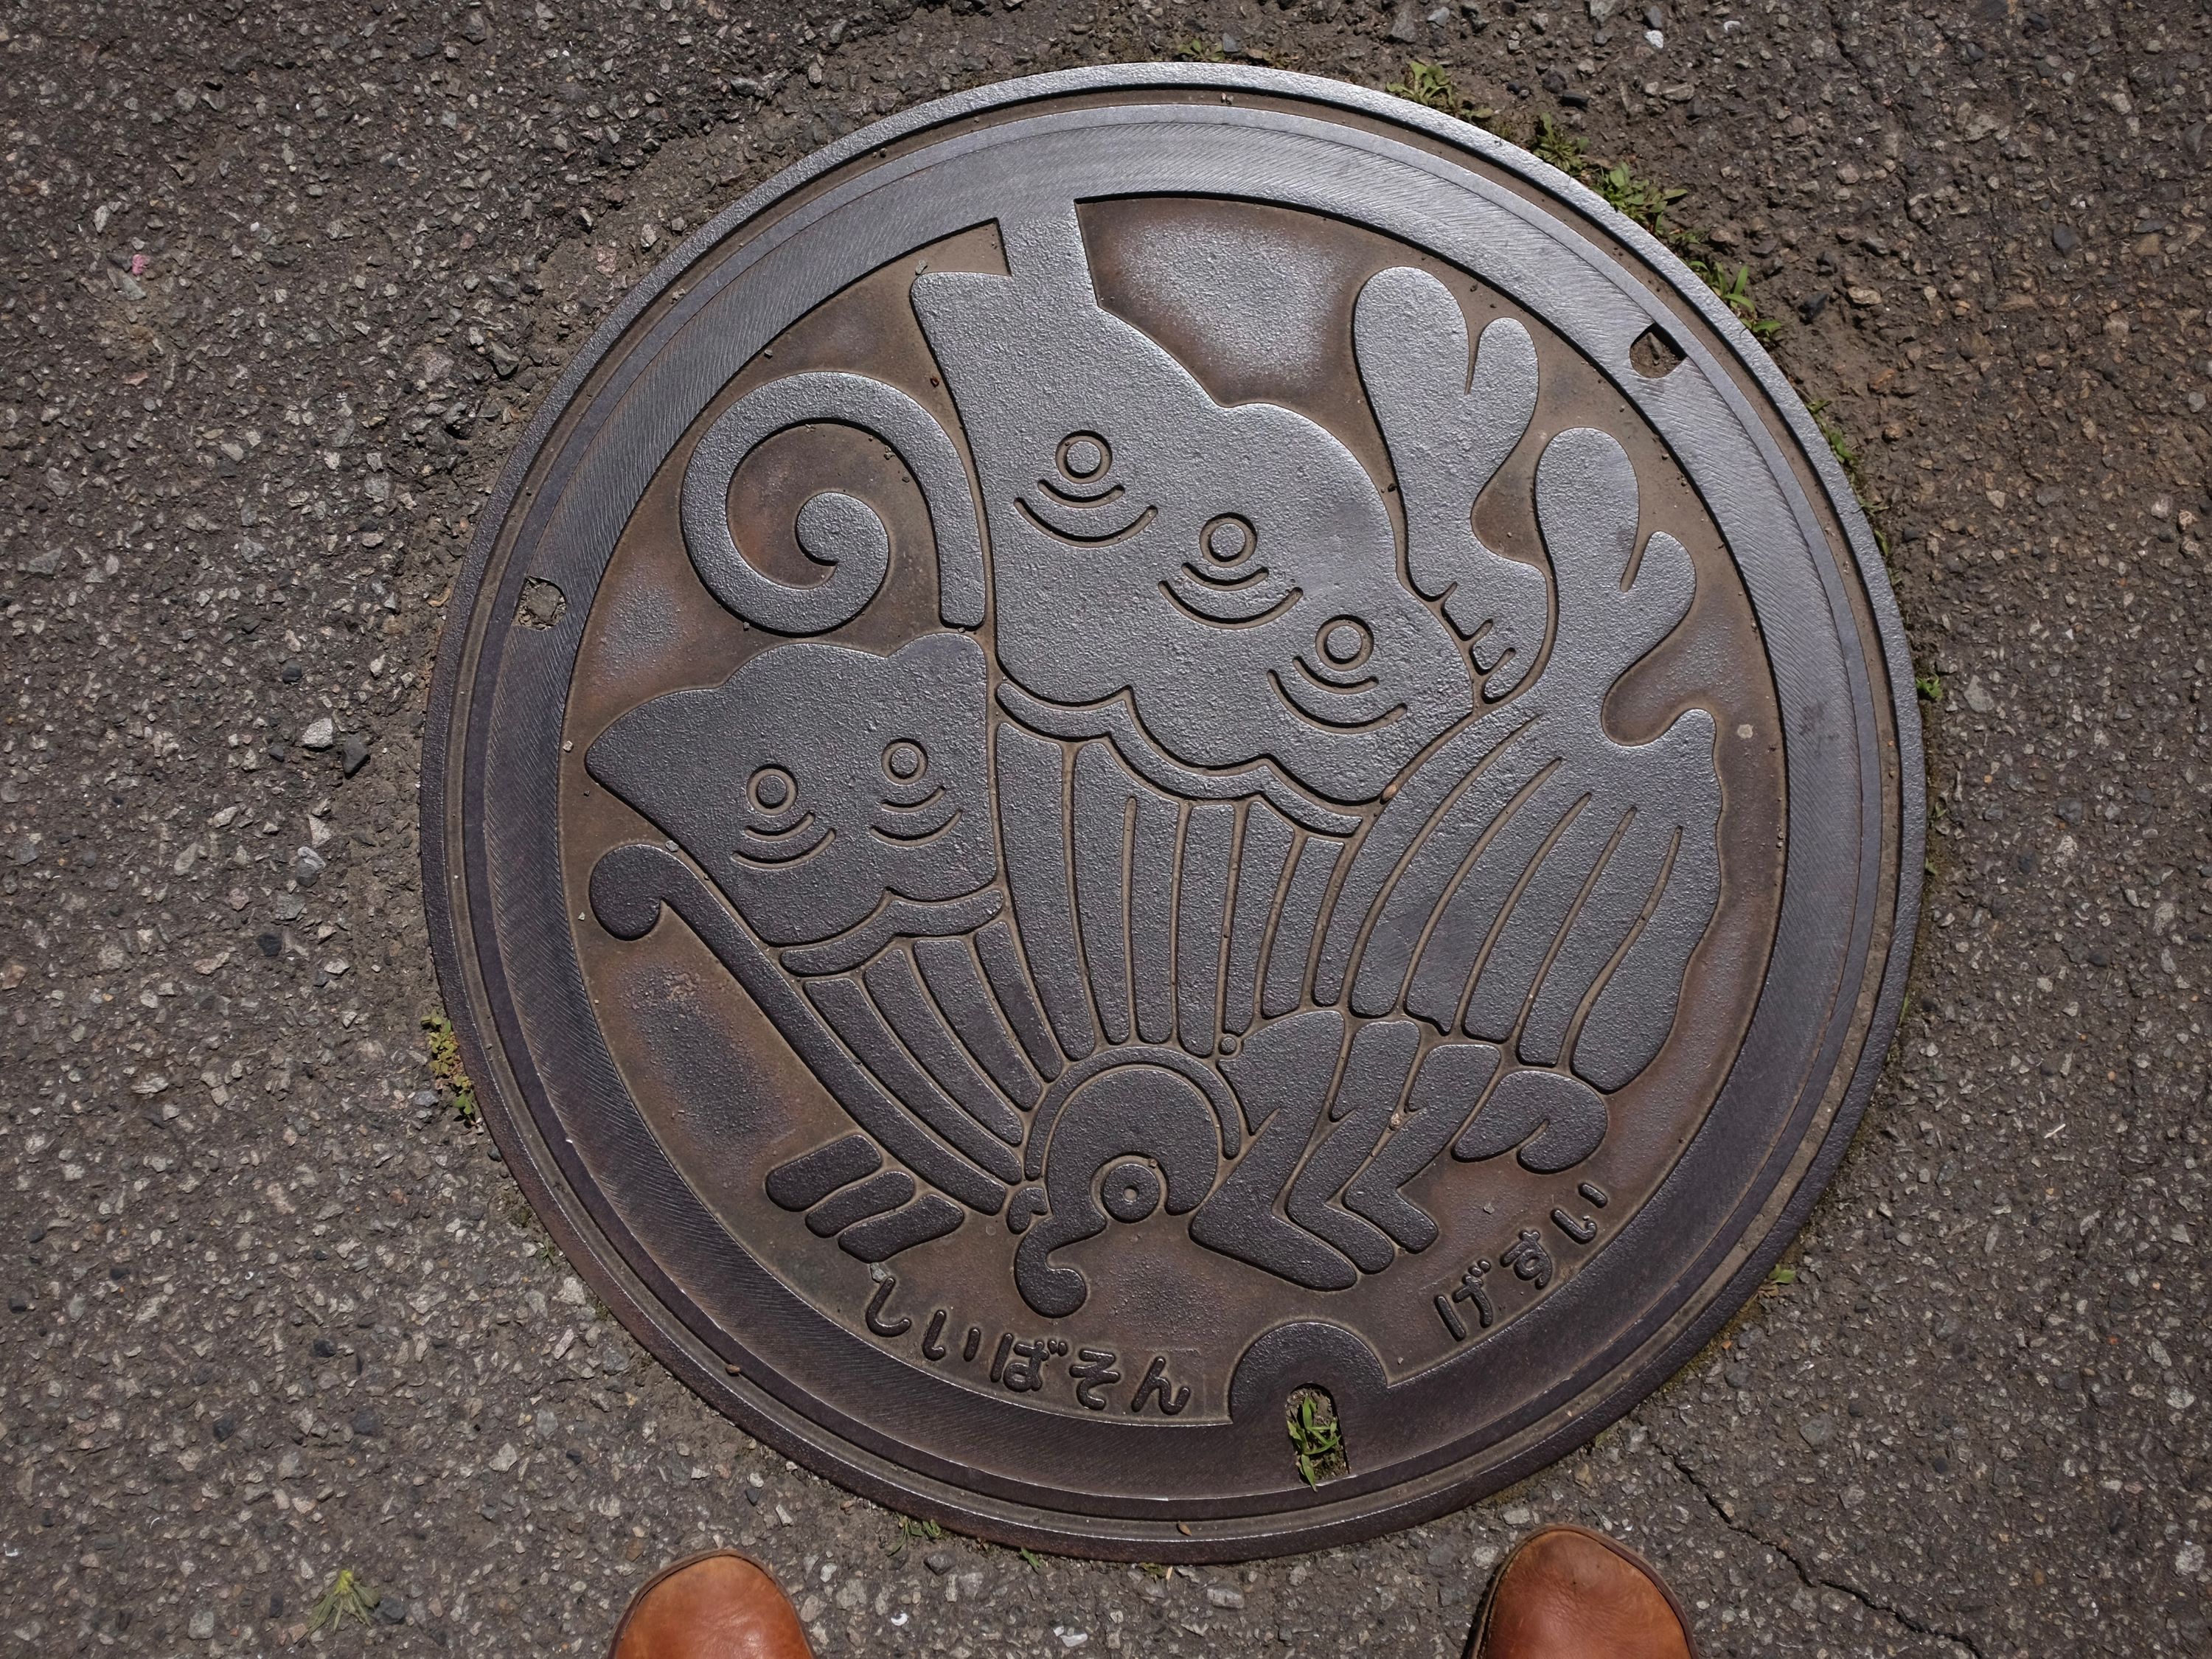 A manhole cover with the crest of the Taira clan, a butterfly, famous from early medieval Japanese history.